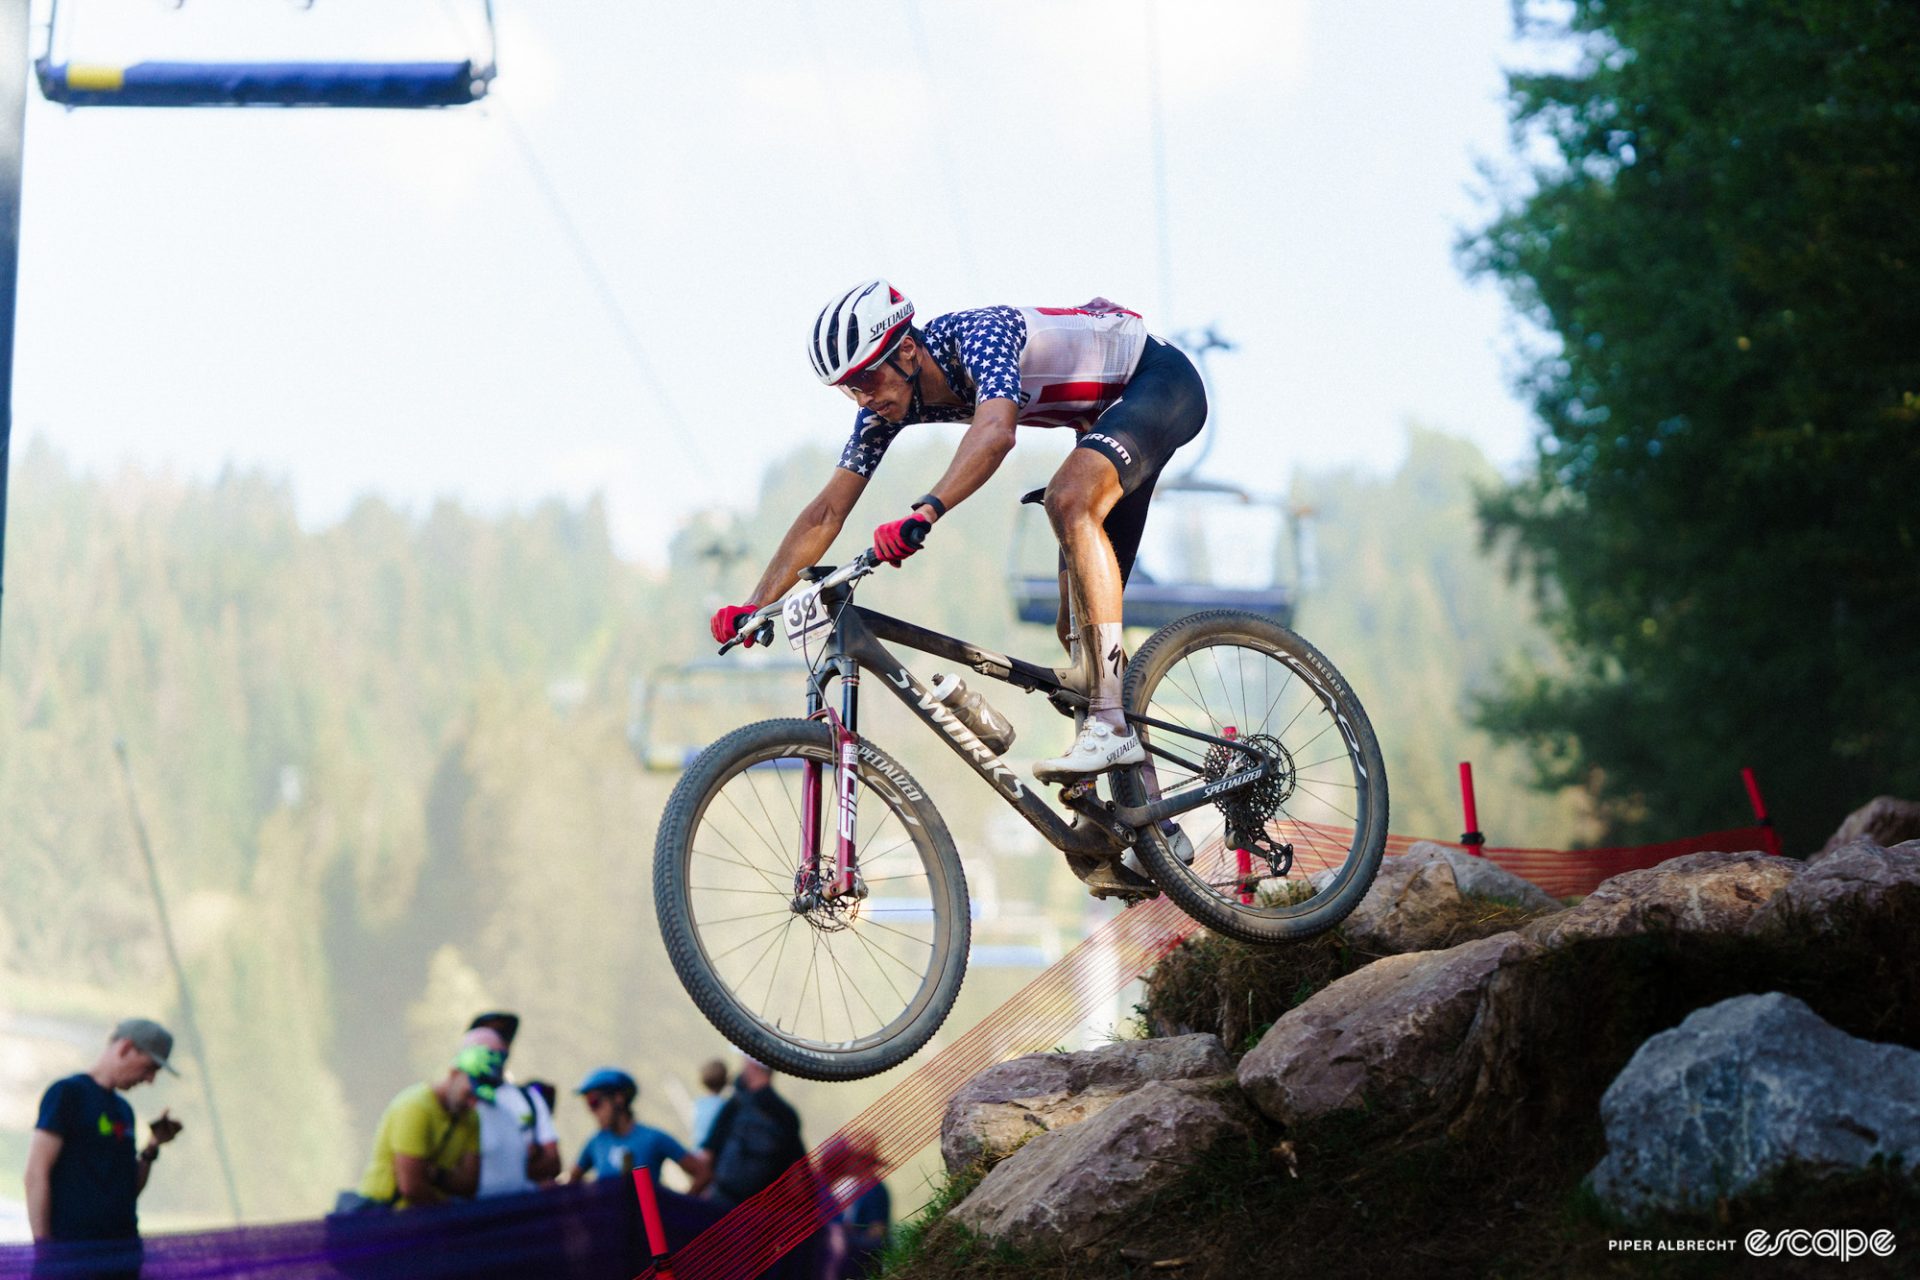 Blevins launches a rock drop at a World Cup. He's fully in the air, arms extended as he pushes the bike out and down over a rocky dropoff in anticipation of the landing.